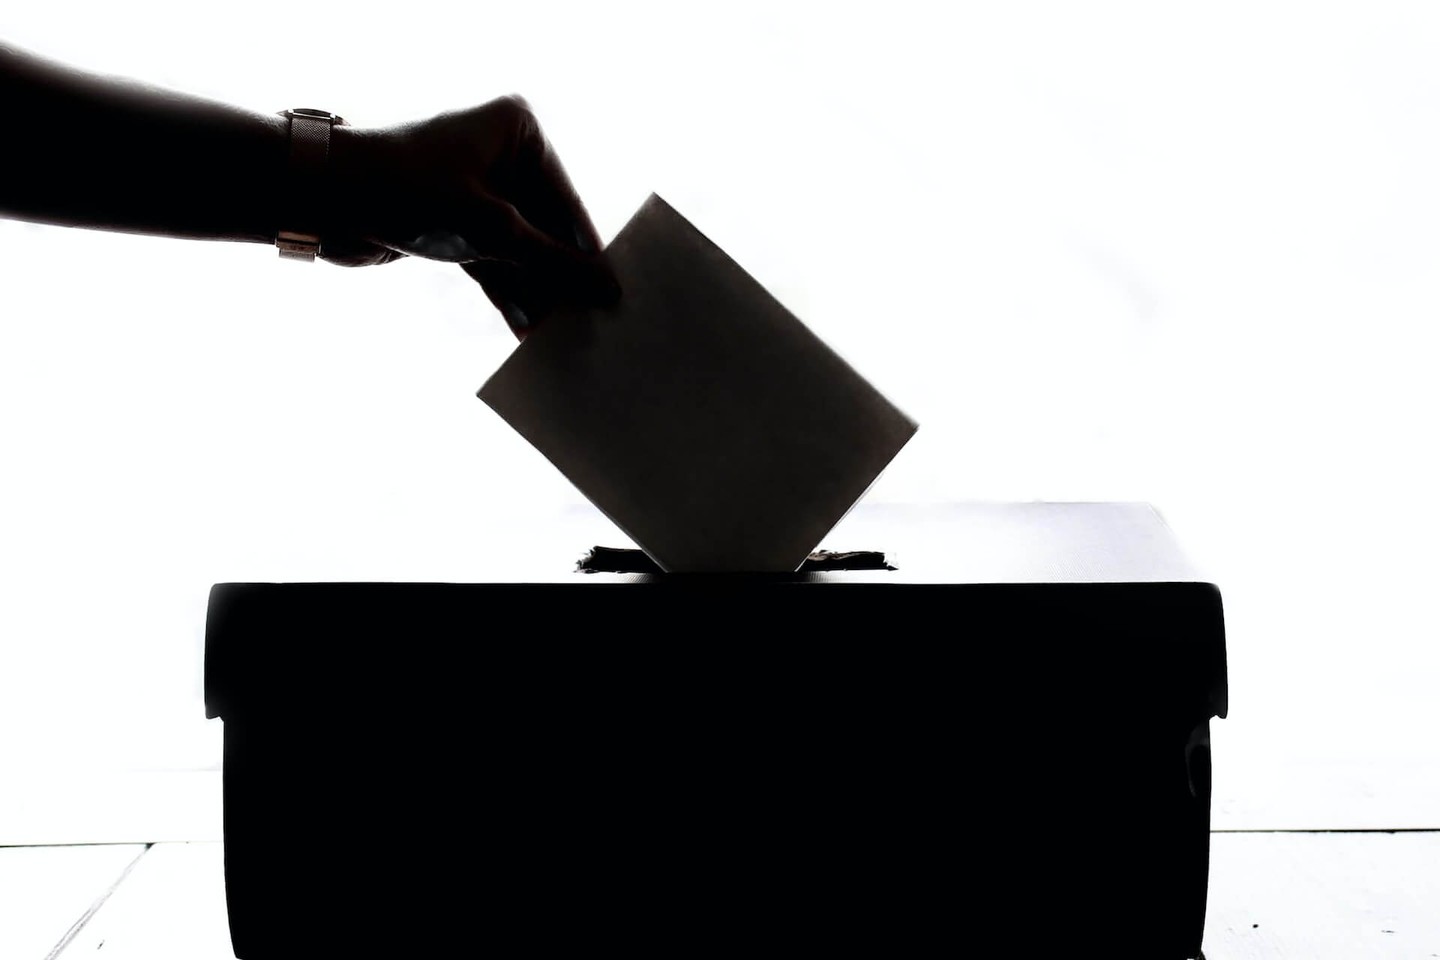 Silhouette of someone voting